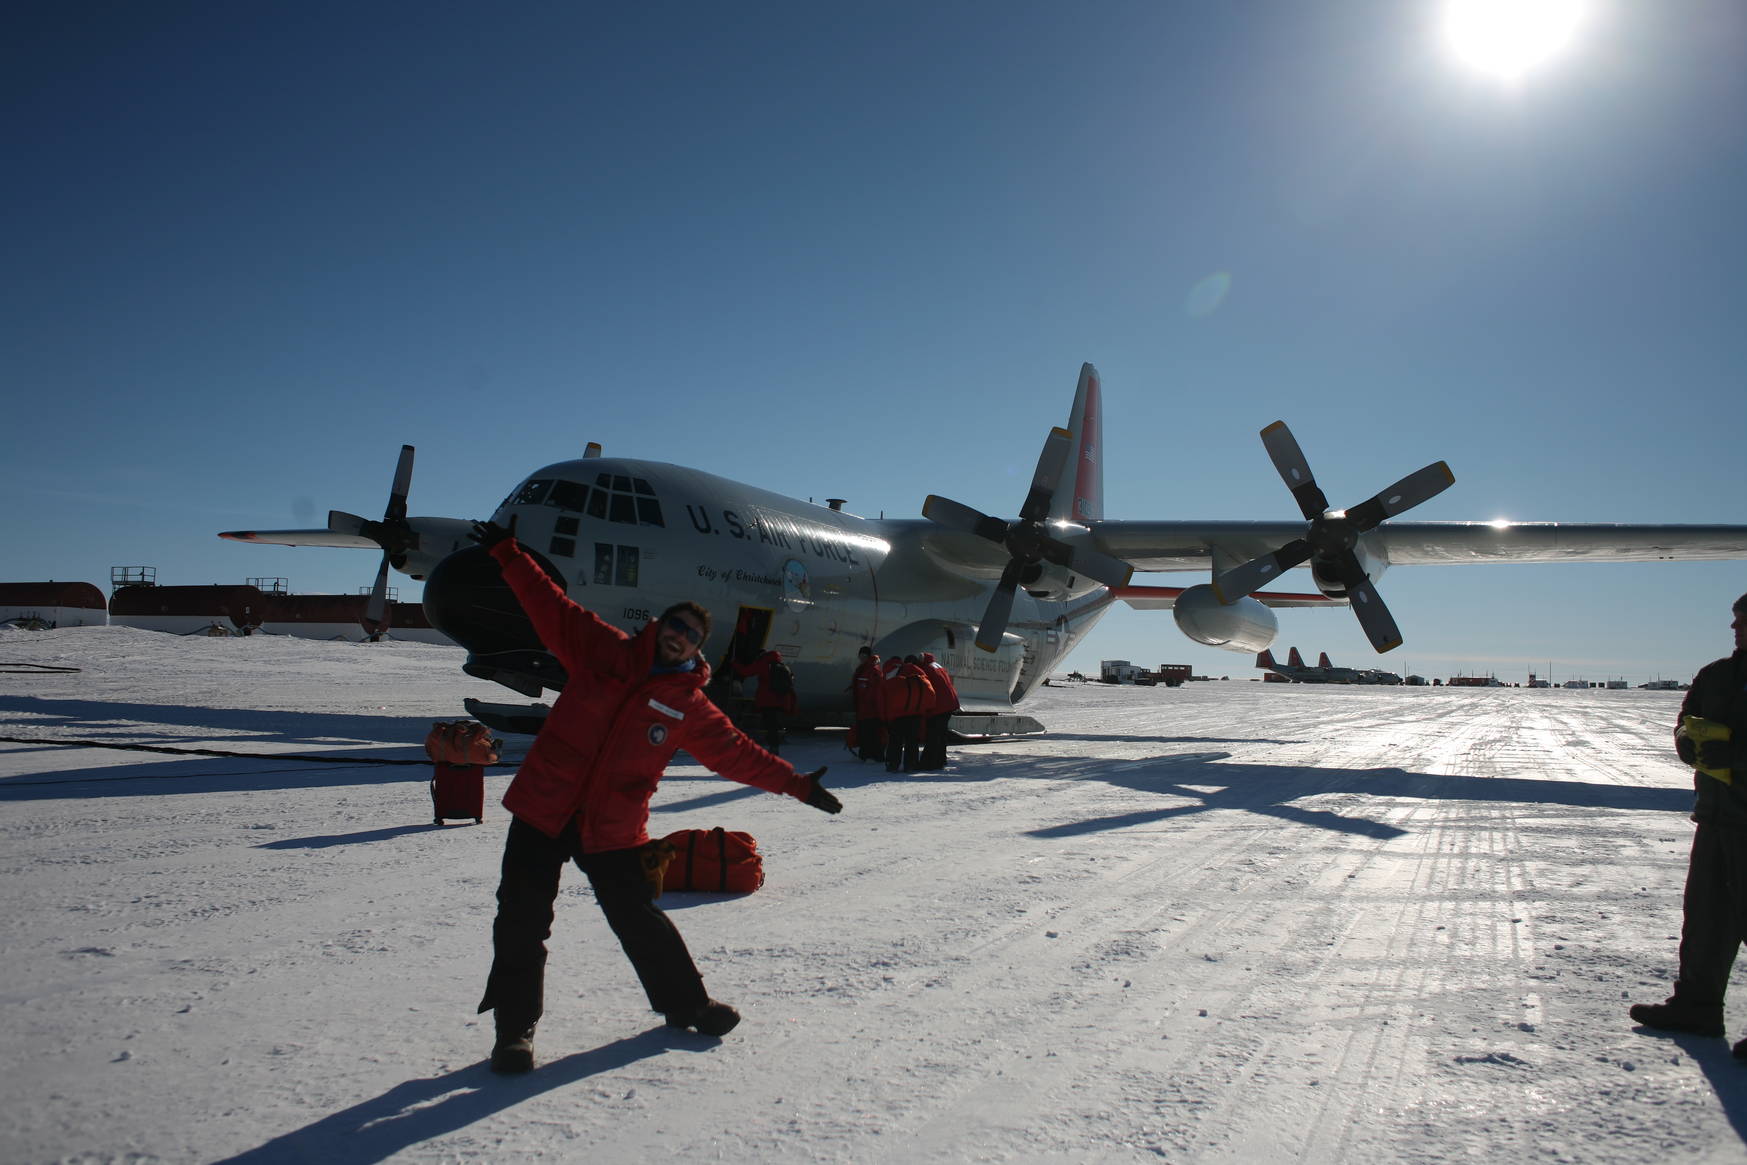 Excited, in front of the LC-130 ski-equipped Hercules.